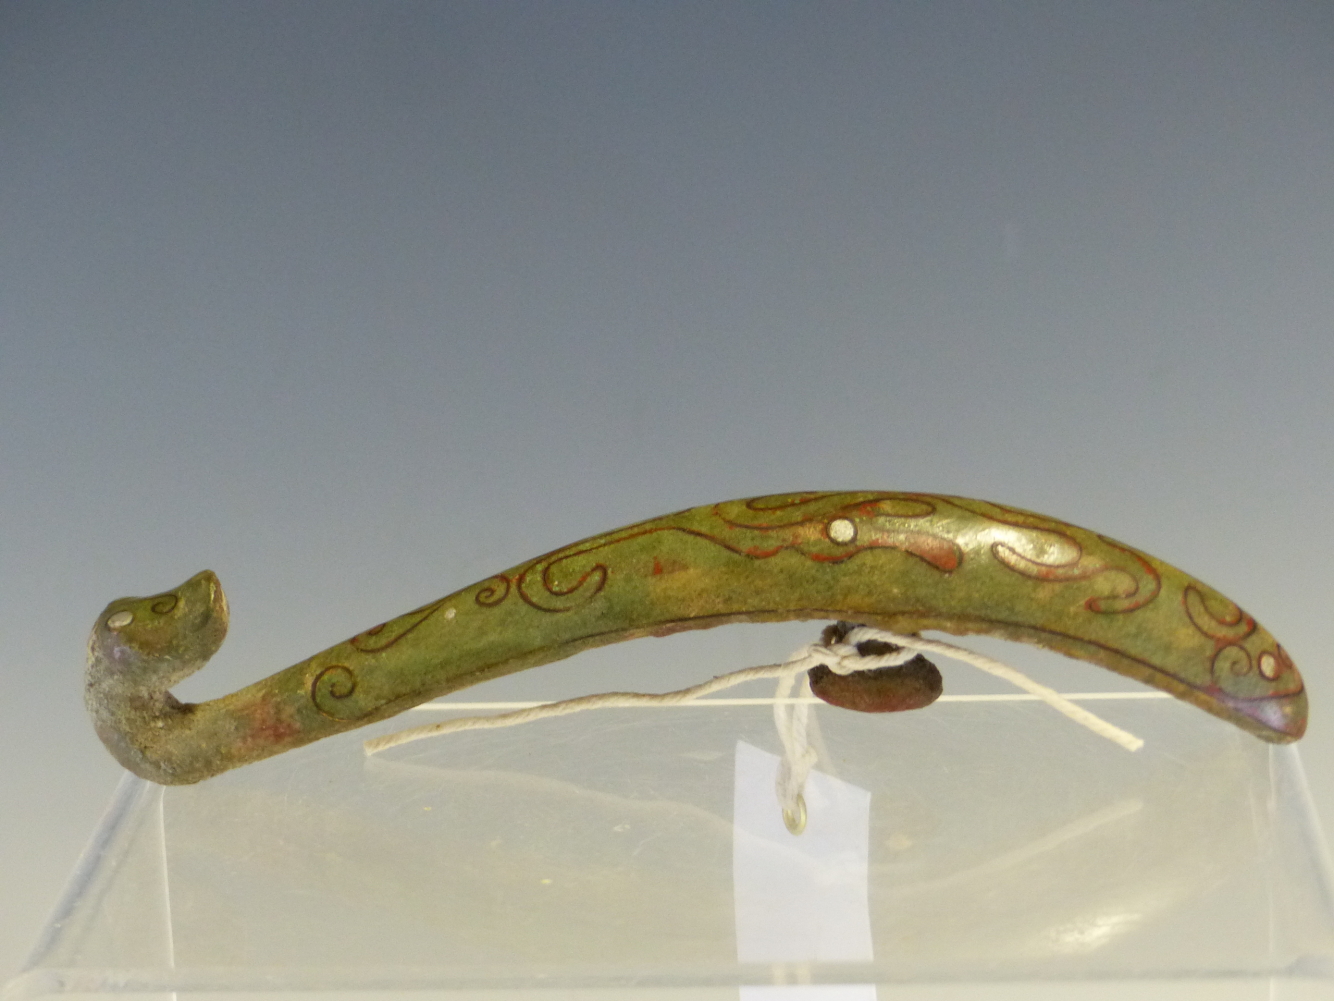 AN EARLY CHINESE BRONZE BELT HOOK, THE DRAGON FORM INLAID WITH COPPER WIRE AND SILVER STIPPLES.